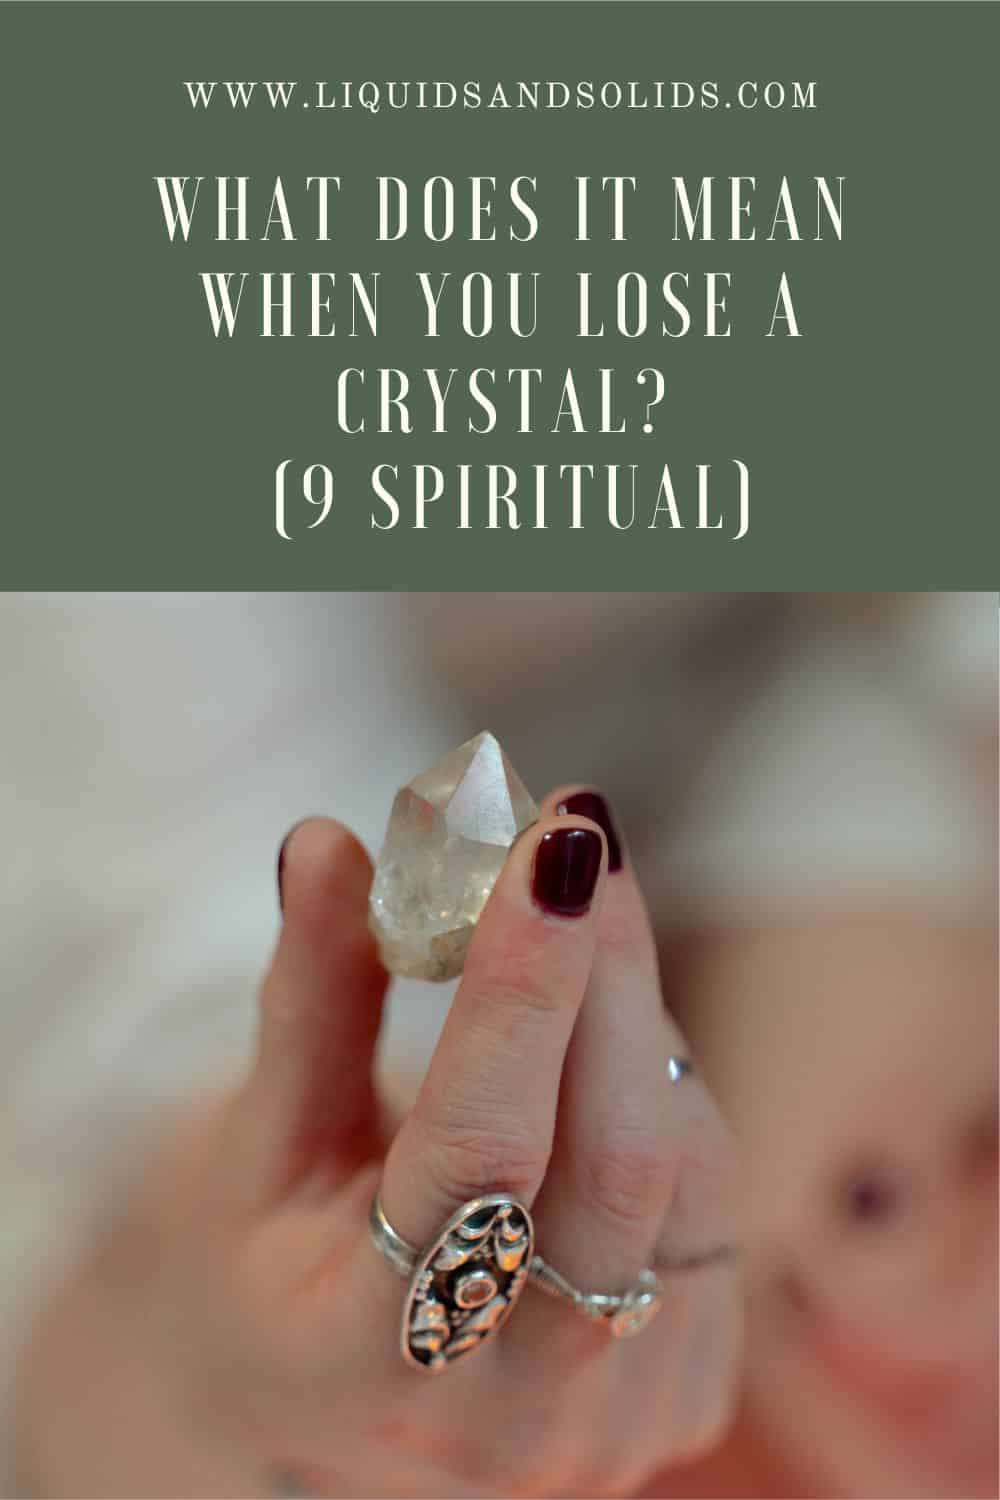 What Does it Mean When You Lose a Crystal? (9 Spiritual Meanings)